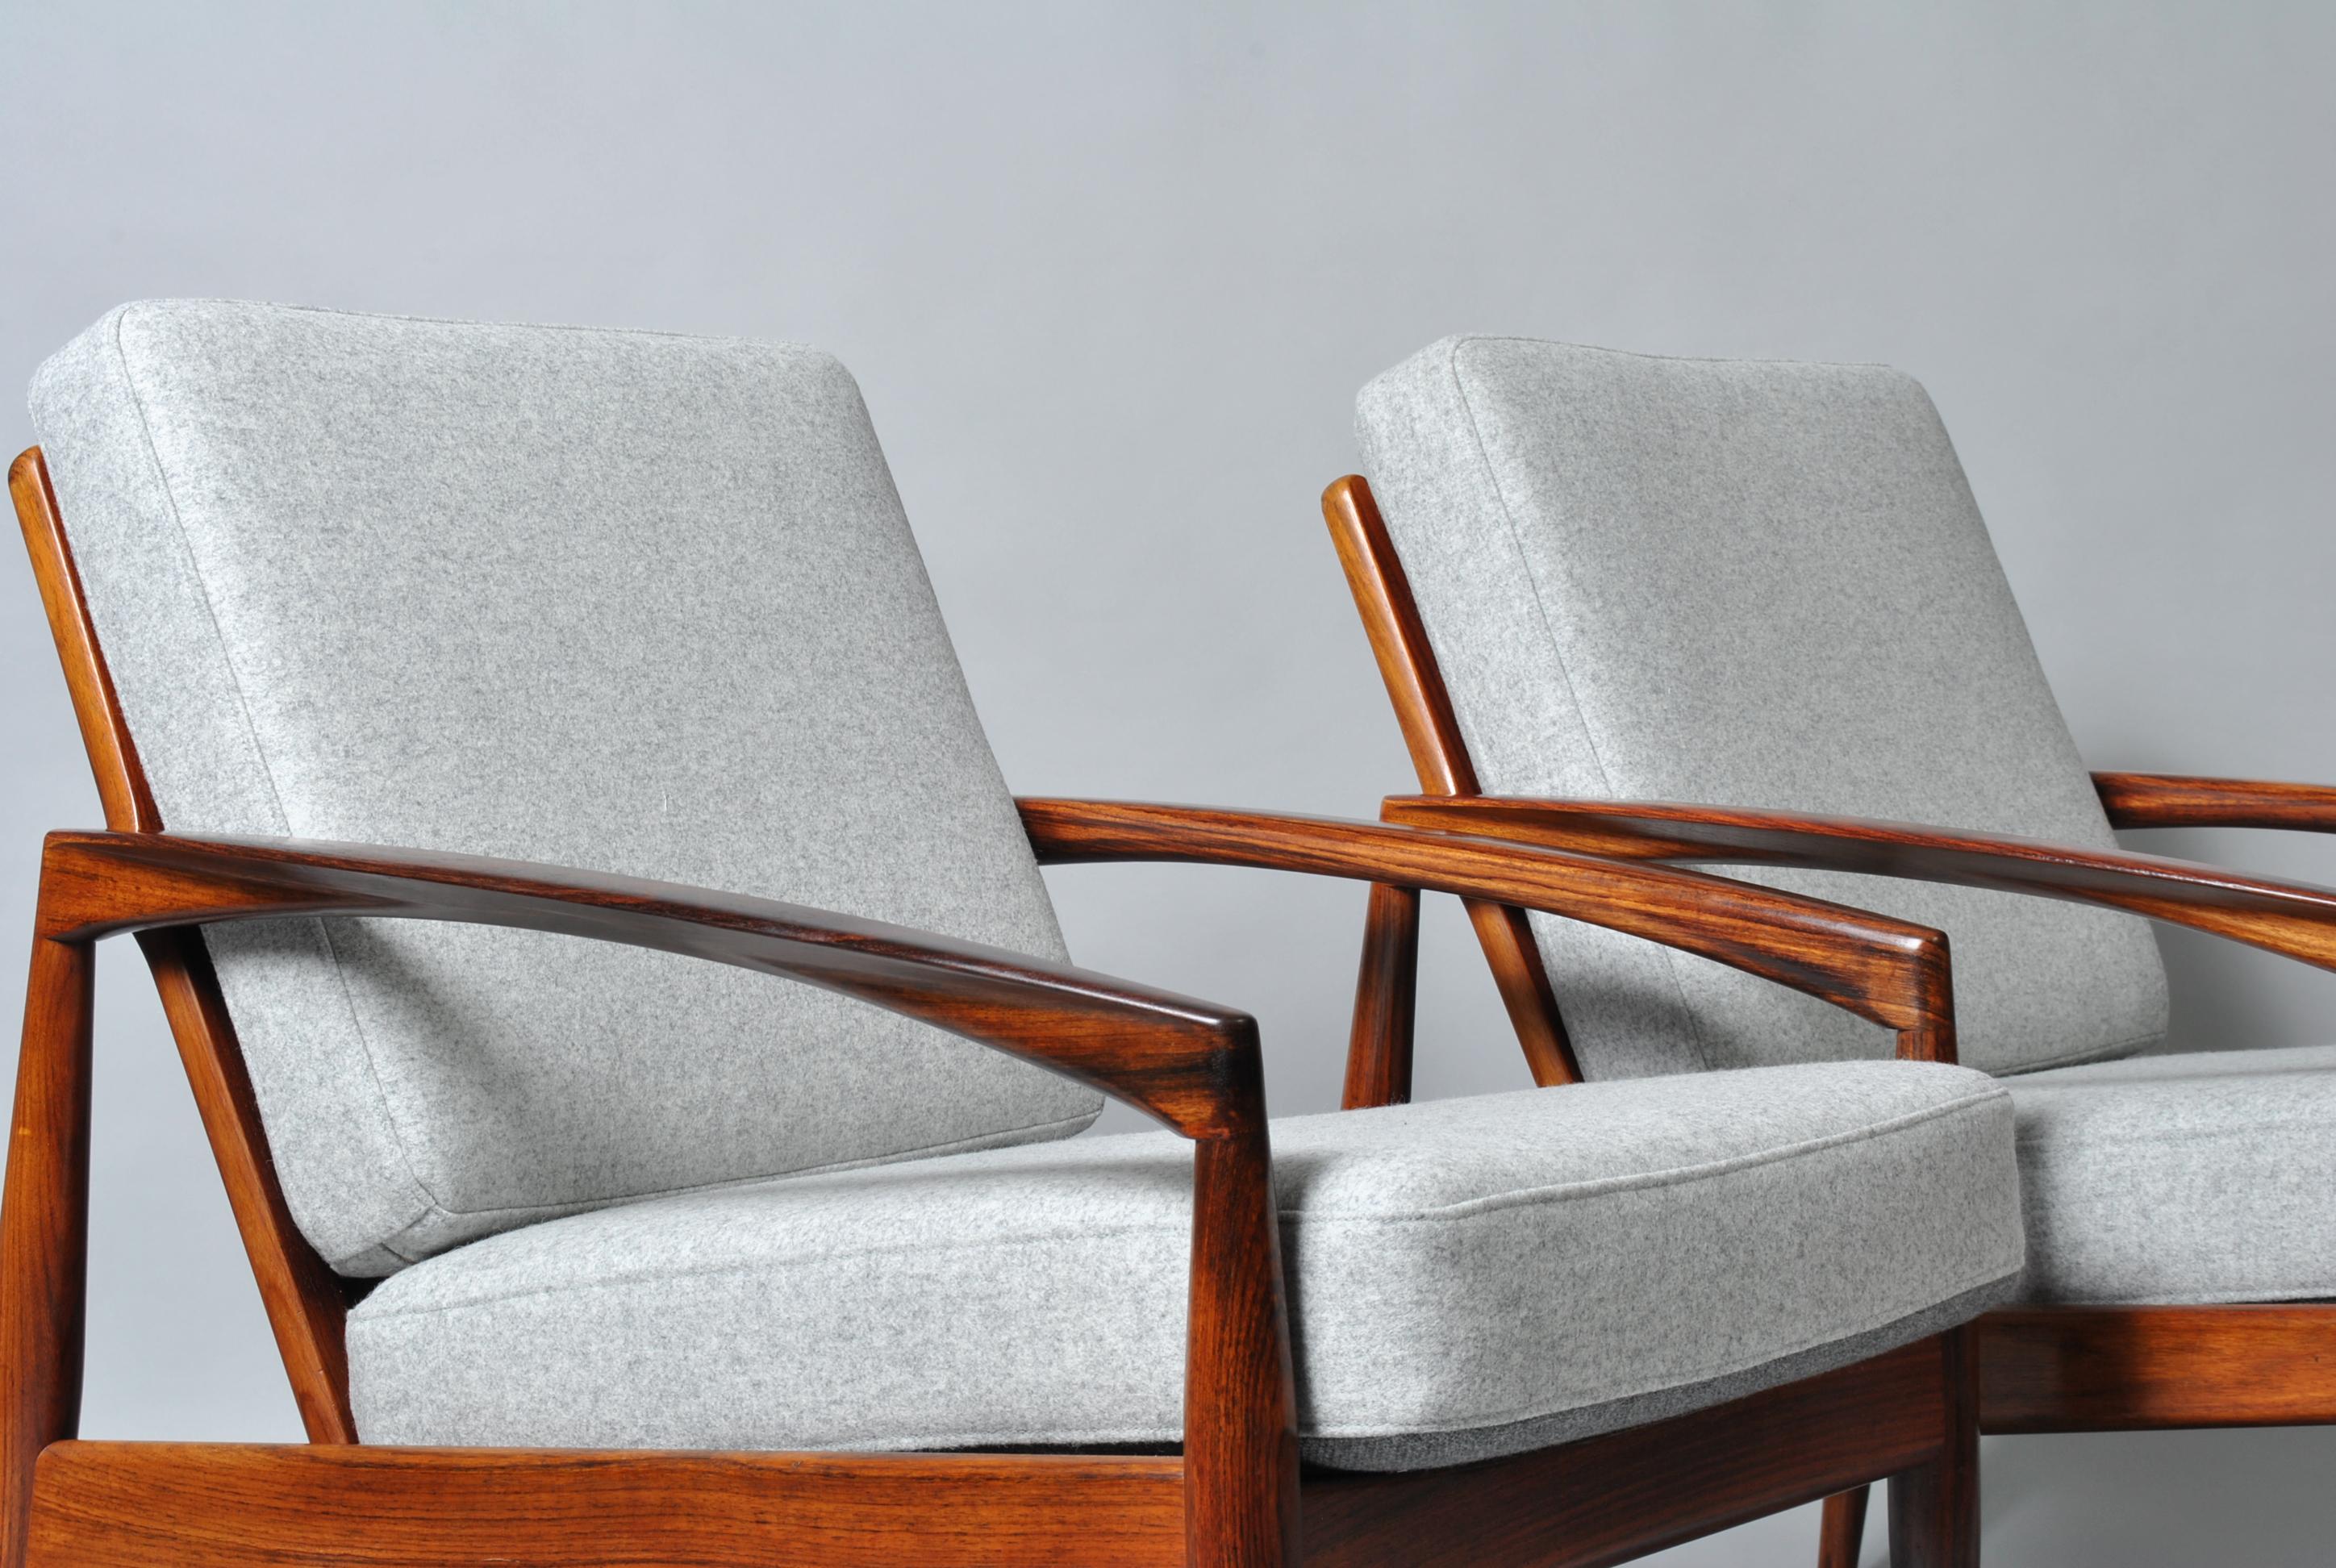 A matching pair of Kai Kristiansen paper knife chairs. They can be purchased separately. Lovely coloured and figured frames which have been thoroughly cleaned and polished. Fully reupholstered in reversible light grey felt and grey wool weave. The